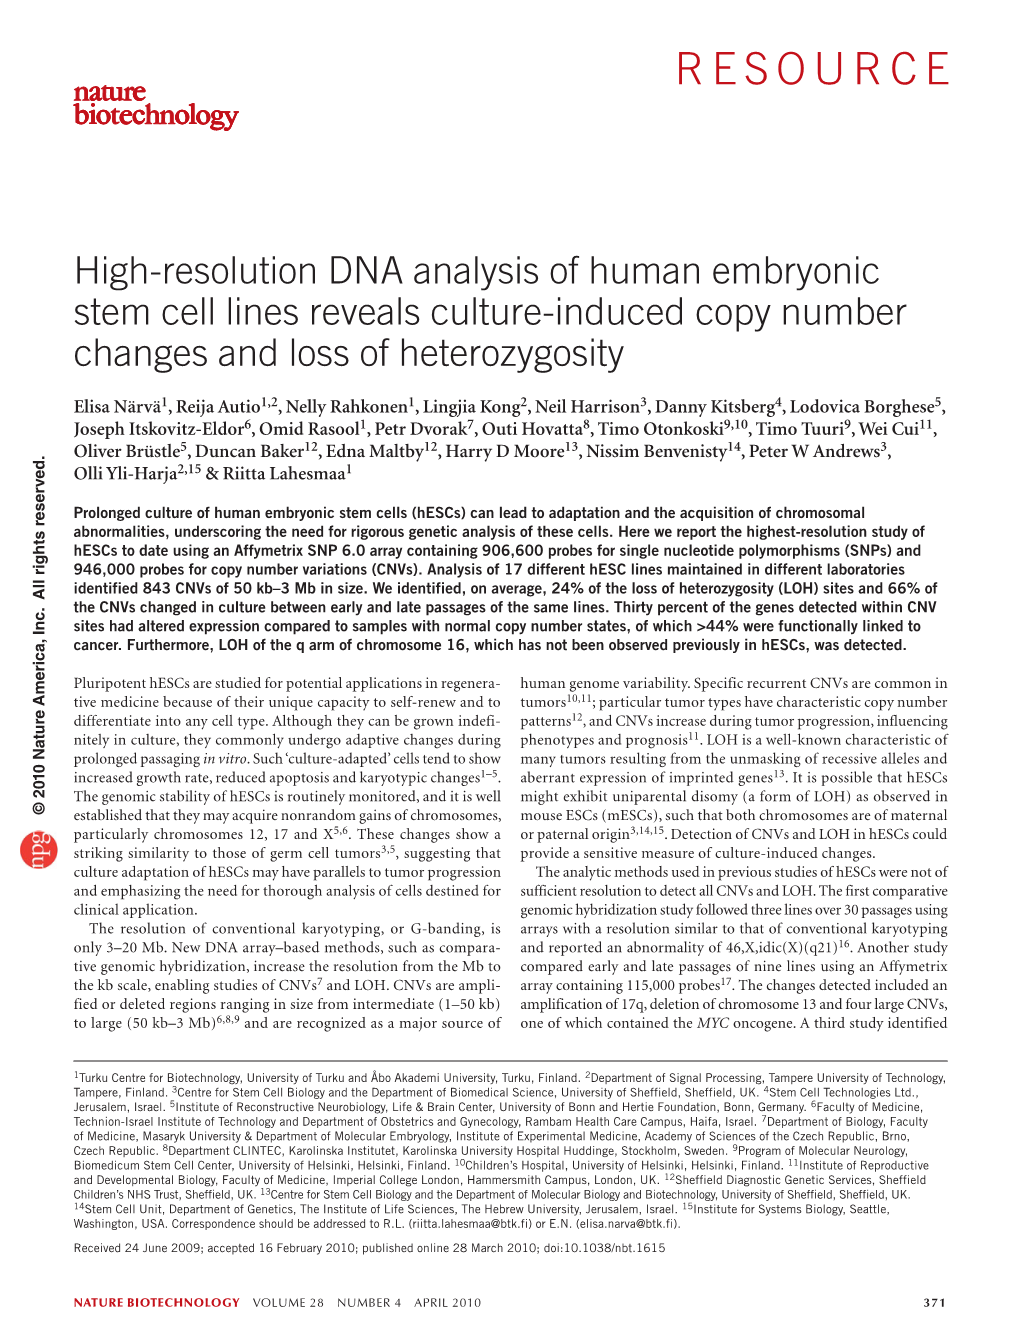 High-Resolution DNA Analysis of Human Embryonic Stem Cell Lines Reveals Culture-Induced Copy Number Changes and Loss of Heterozygosity